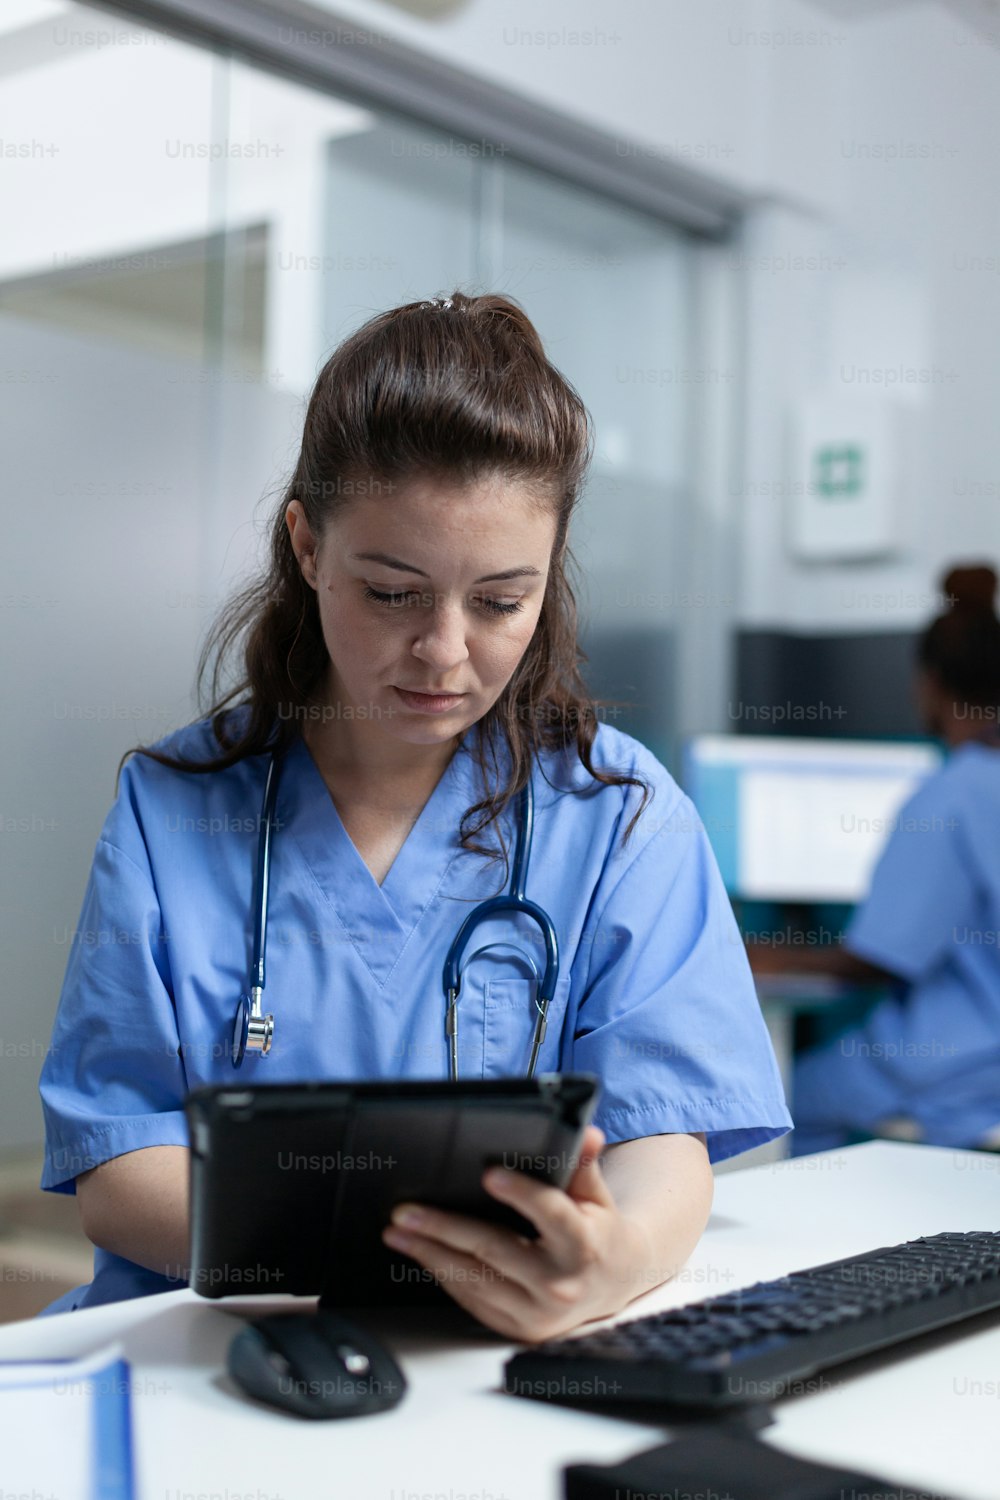 Practitioner nurse holding tablet computer analyzing sickness expertise working at healthcare treatment in hospital office. pediatrician asisstance checking pharmaceutical medication sitting at desk